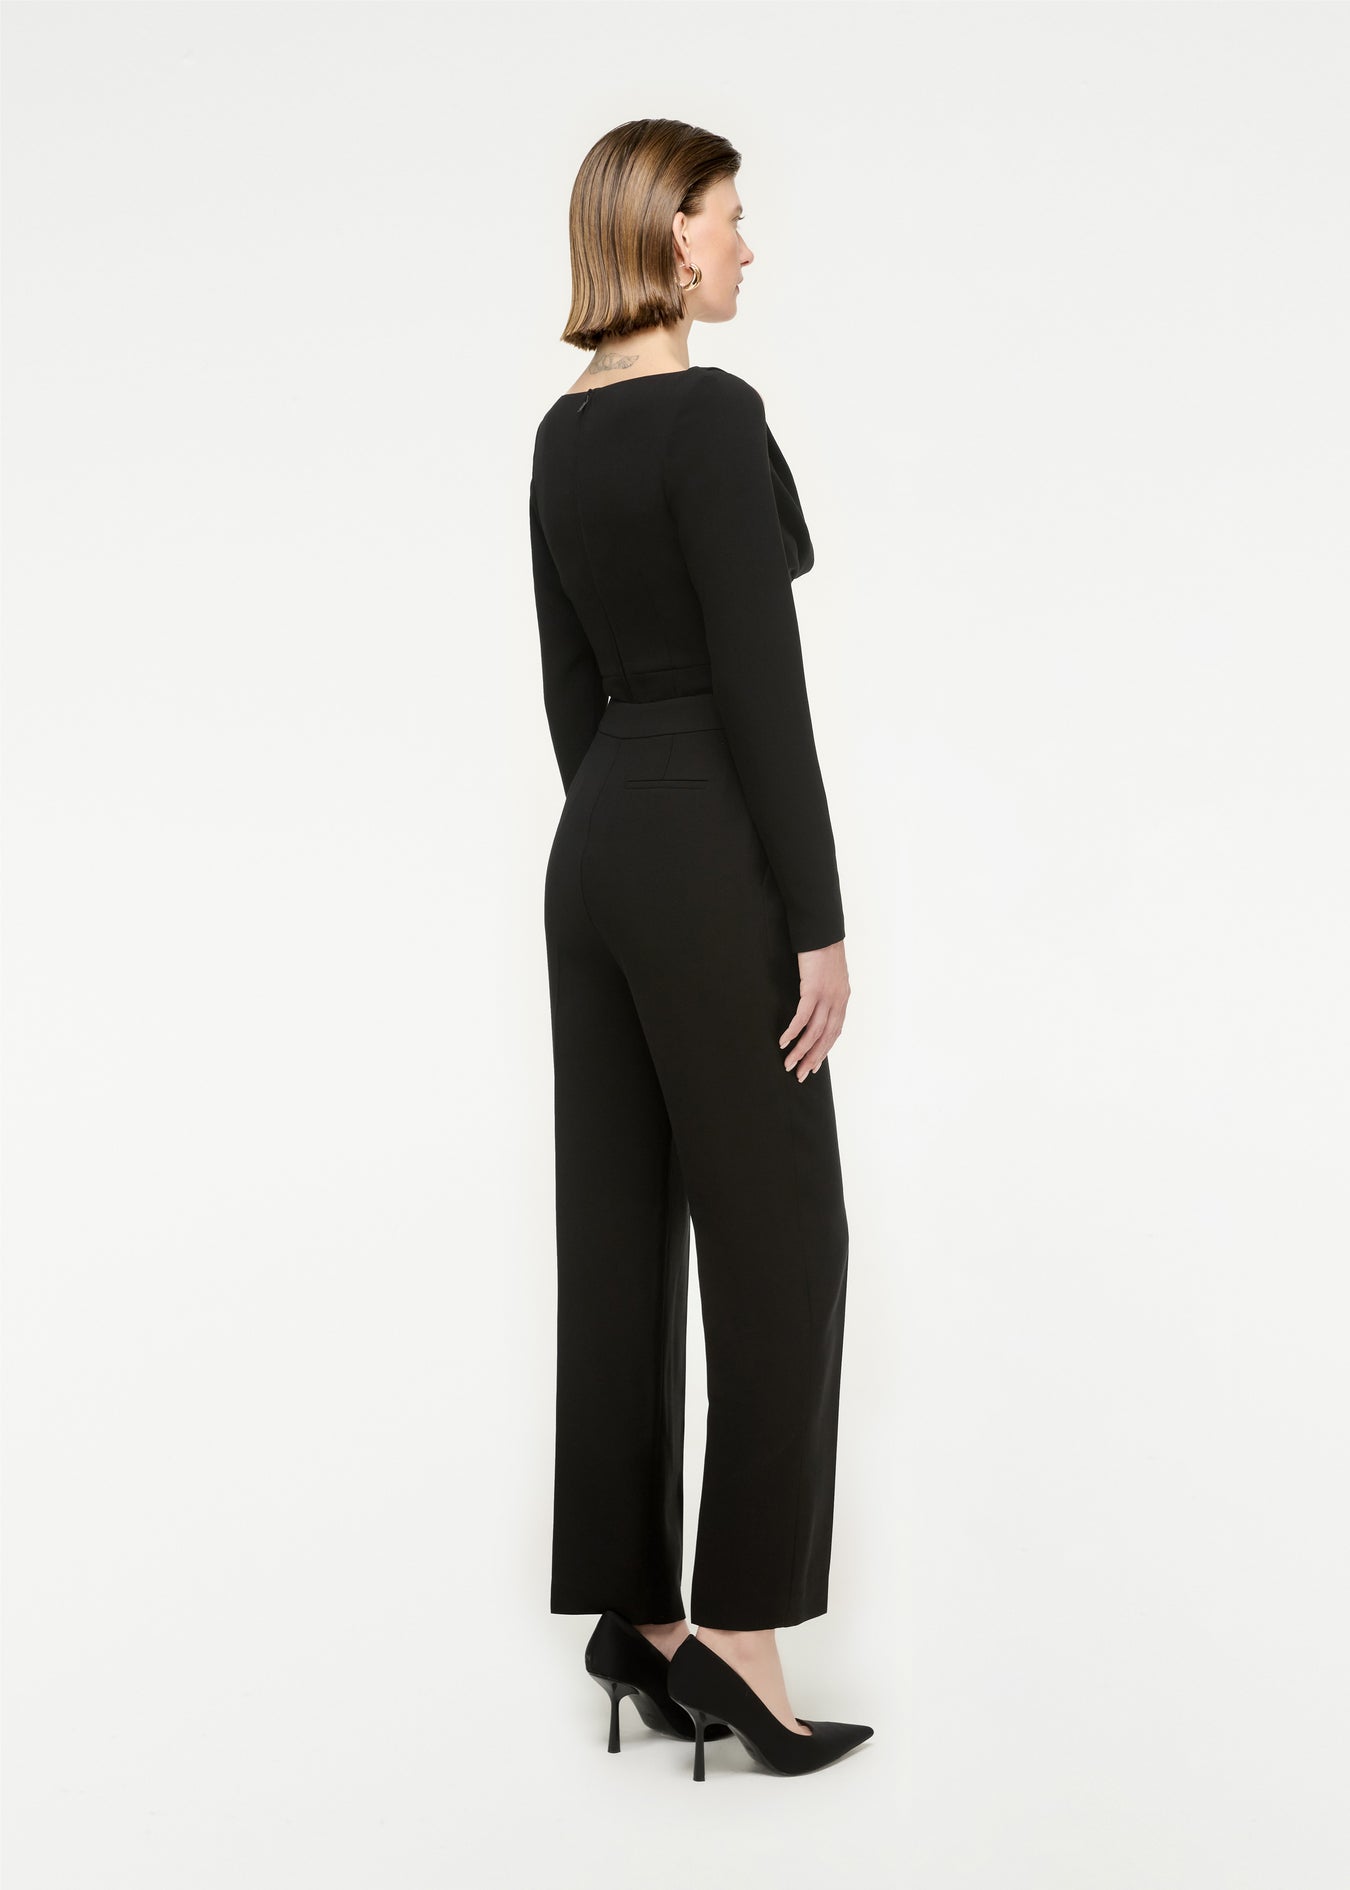 The back of a woman wearing the Long Sleeve Stretch Cady Top in Monochrome